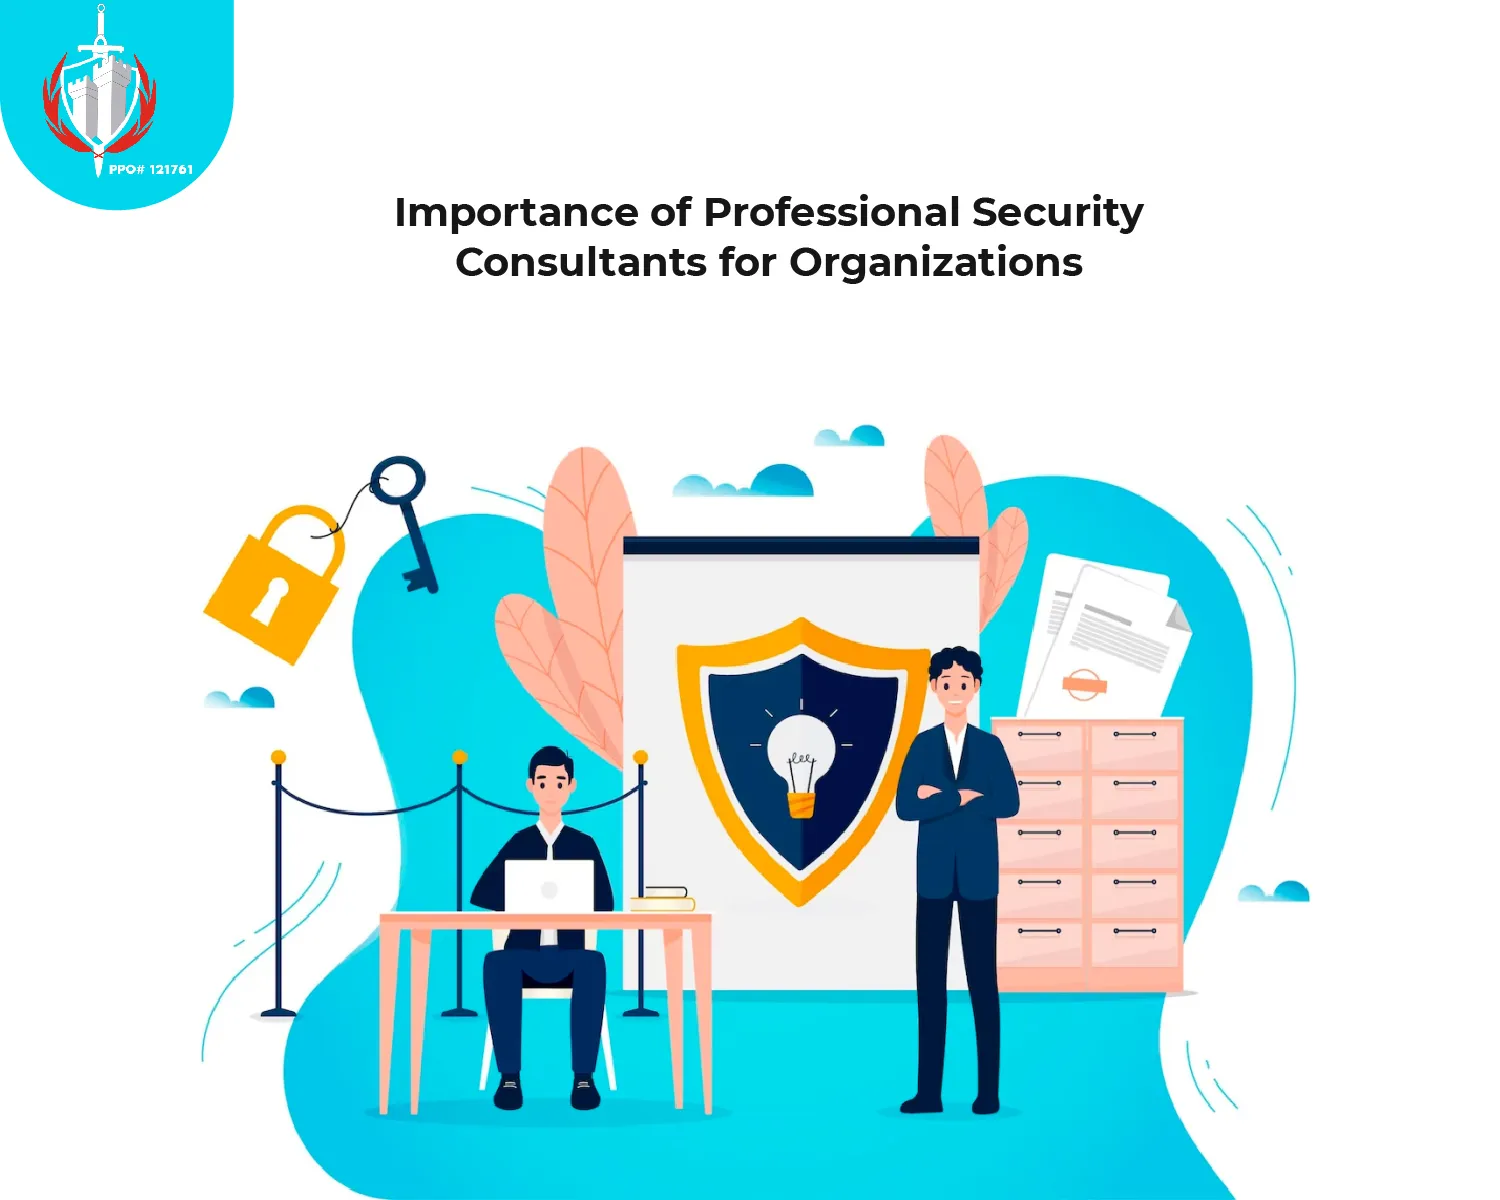 Importance of Professional Security Consultants for Organizations